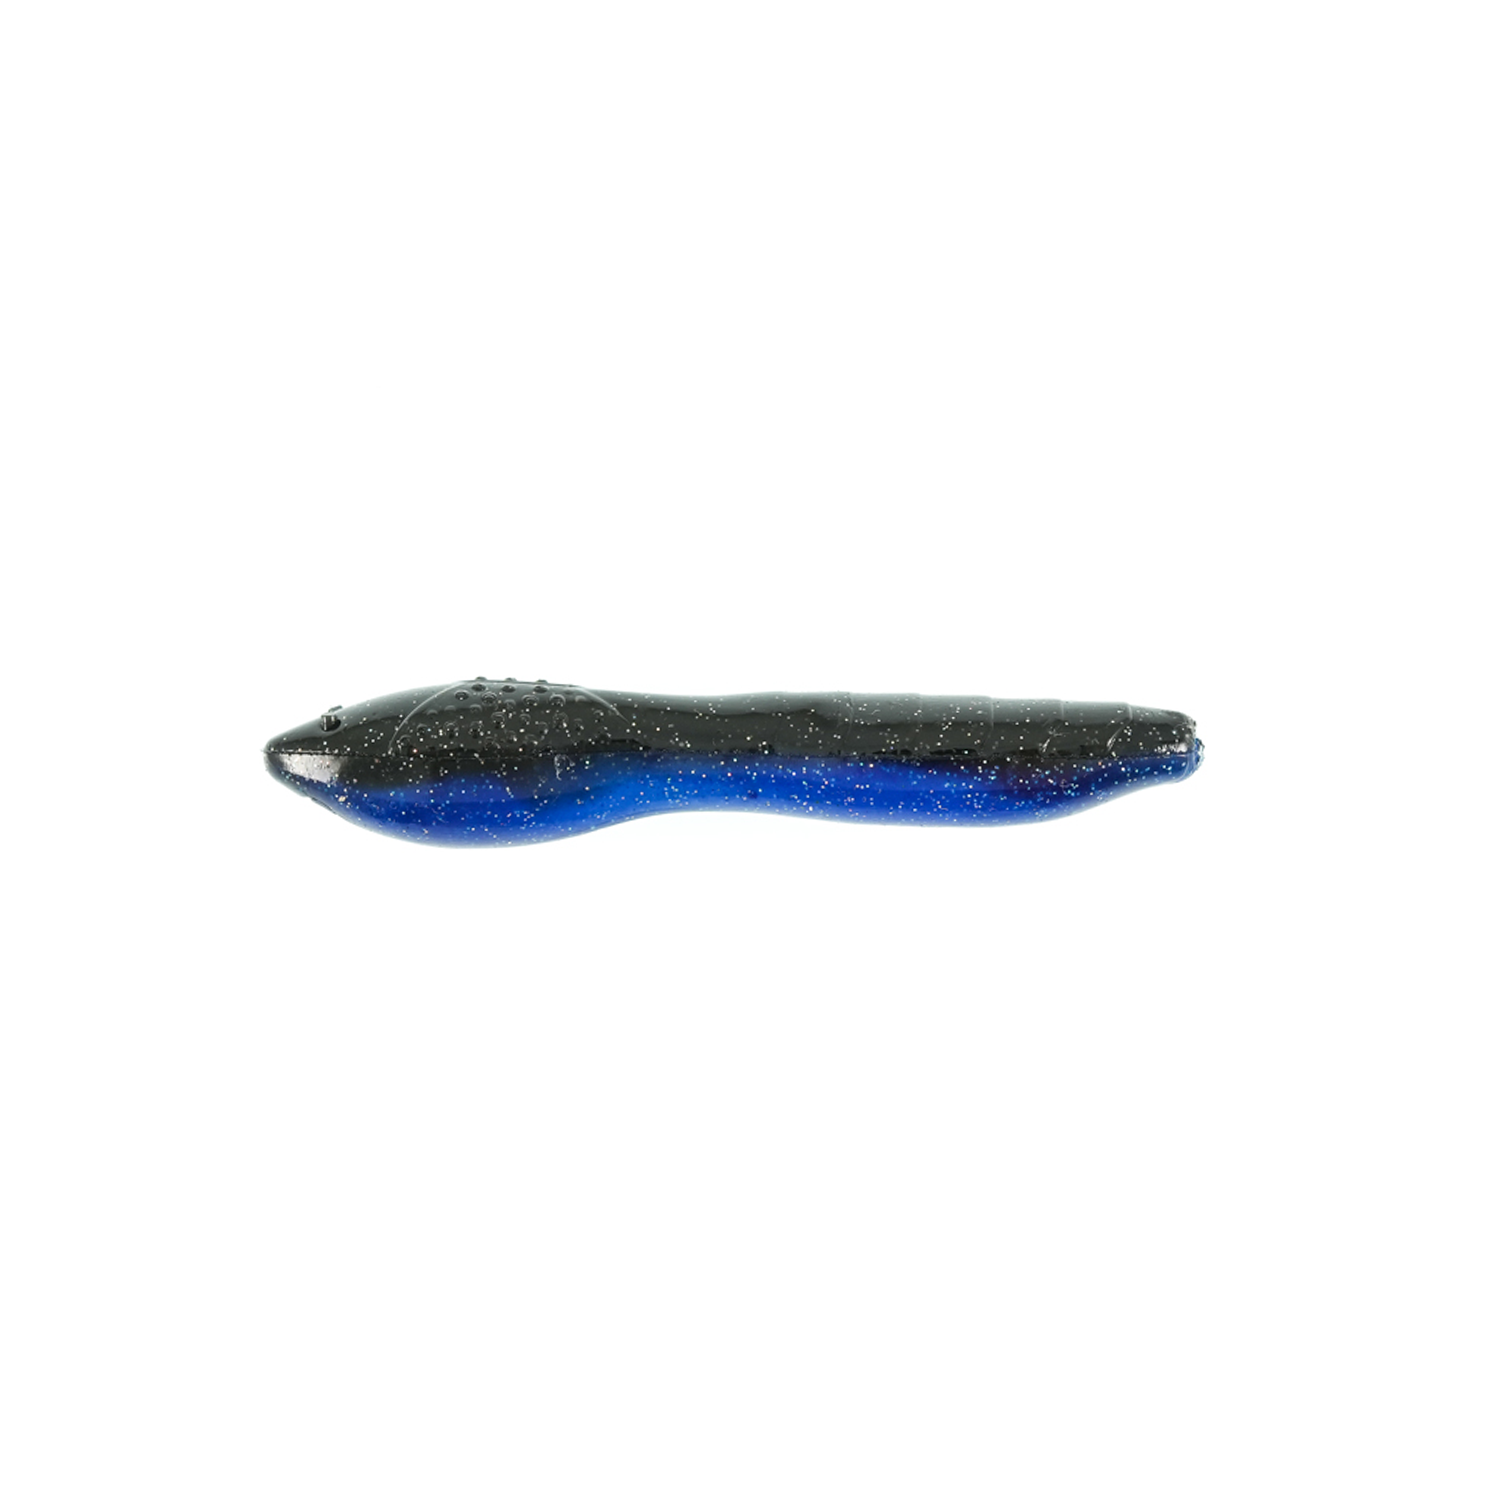 MISSILE BAITS SPUNK SHAD 5.5 FROSTED PURPLE QTY 6